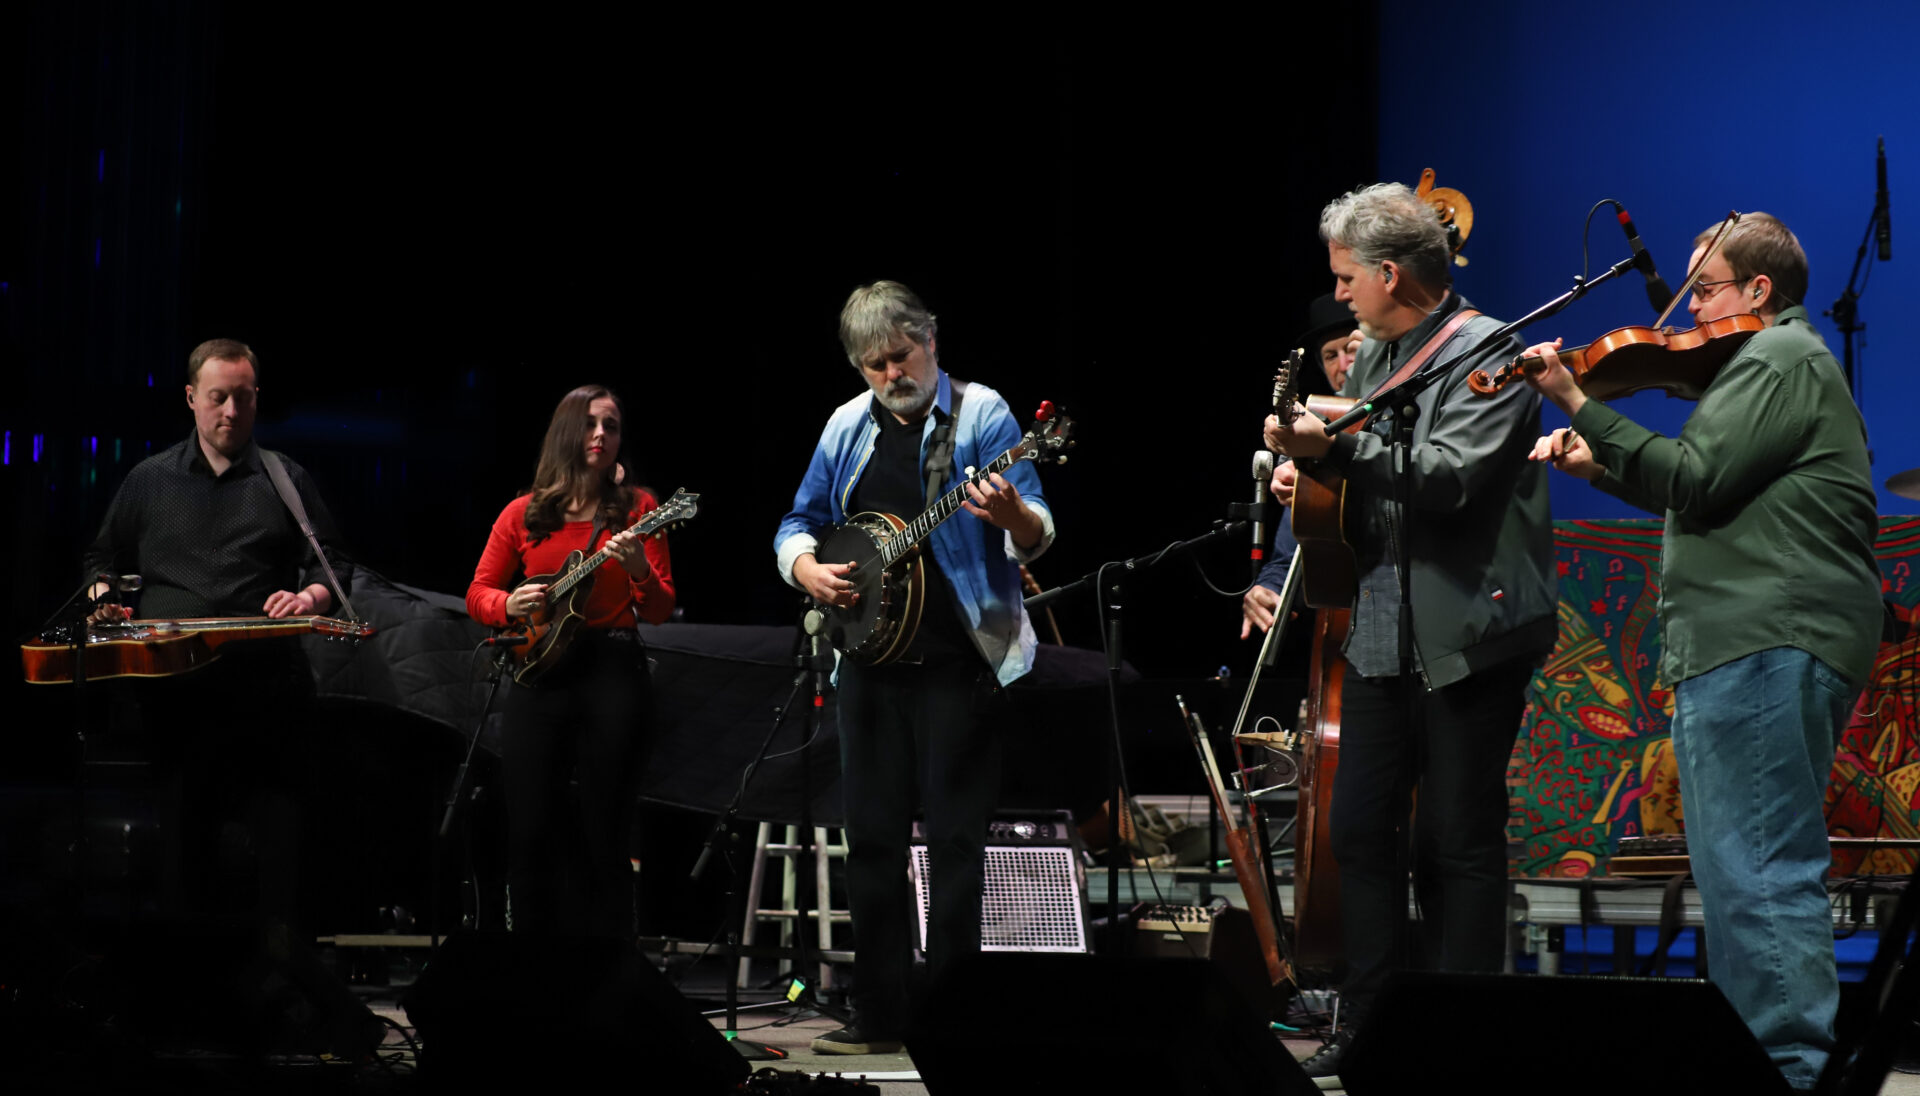 Musicians with bluegrass instruments performing on stage.